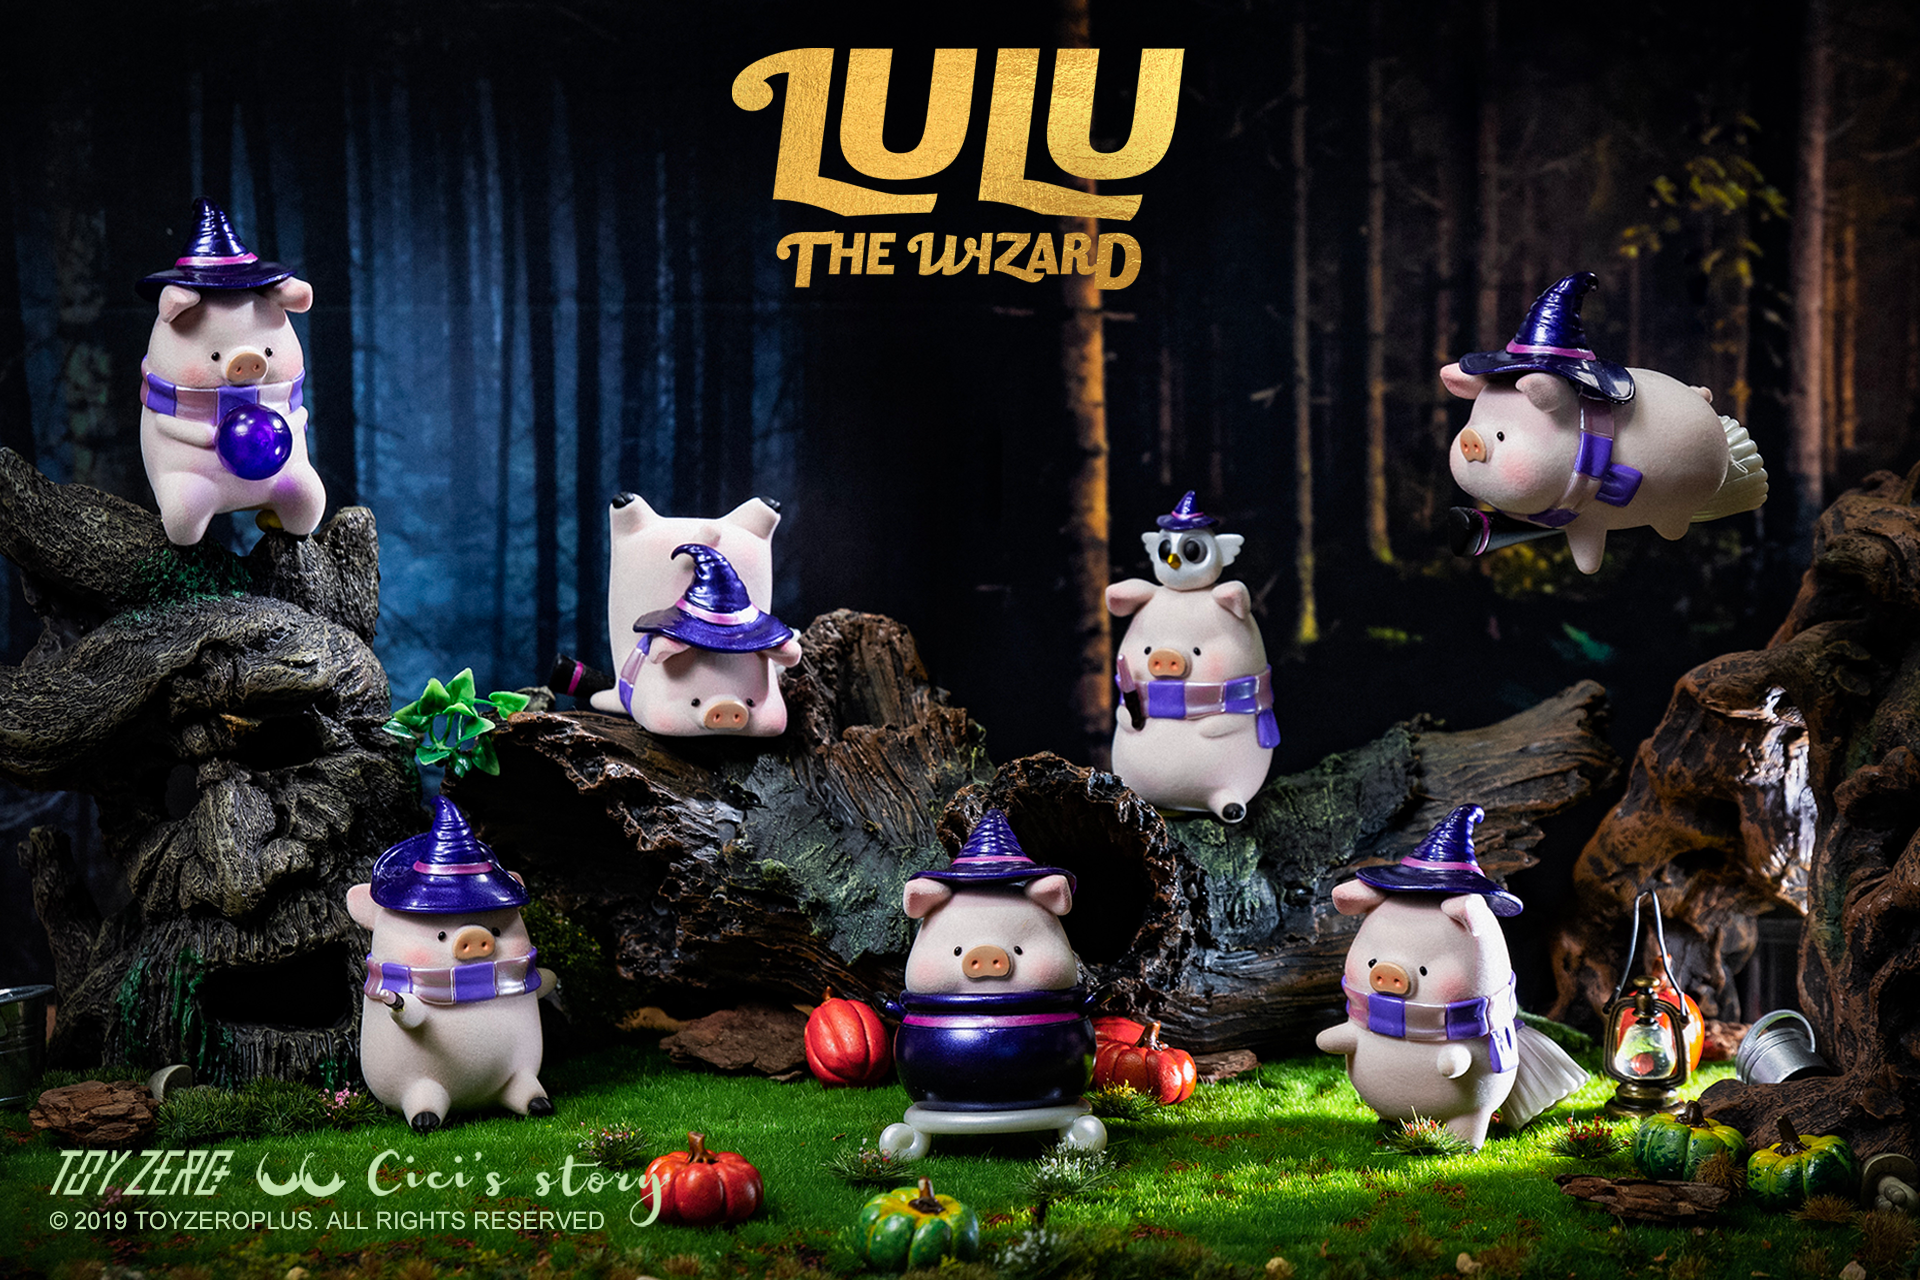 Lulu The Piggy Can - The Wizard Series by Cici’s Story